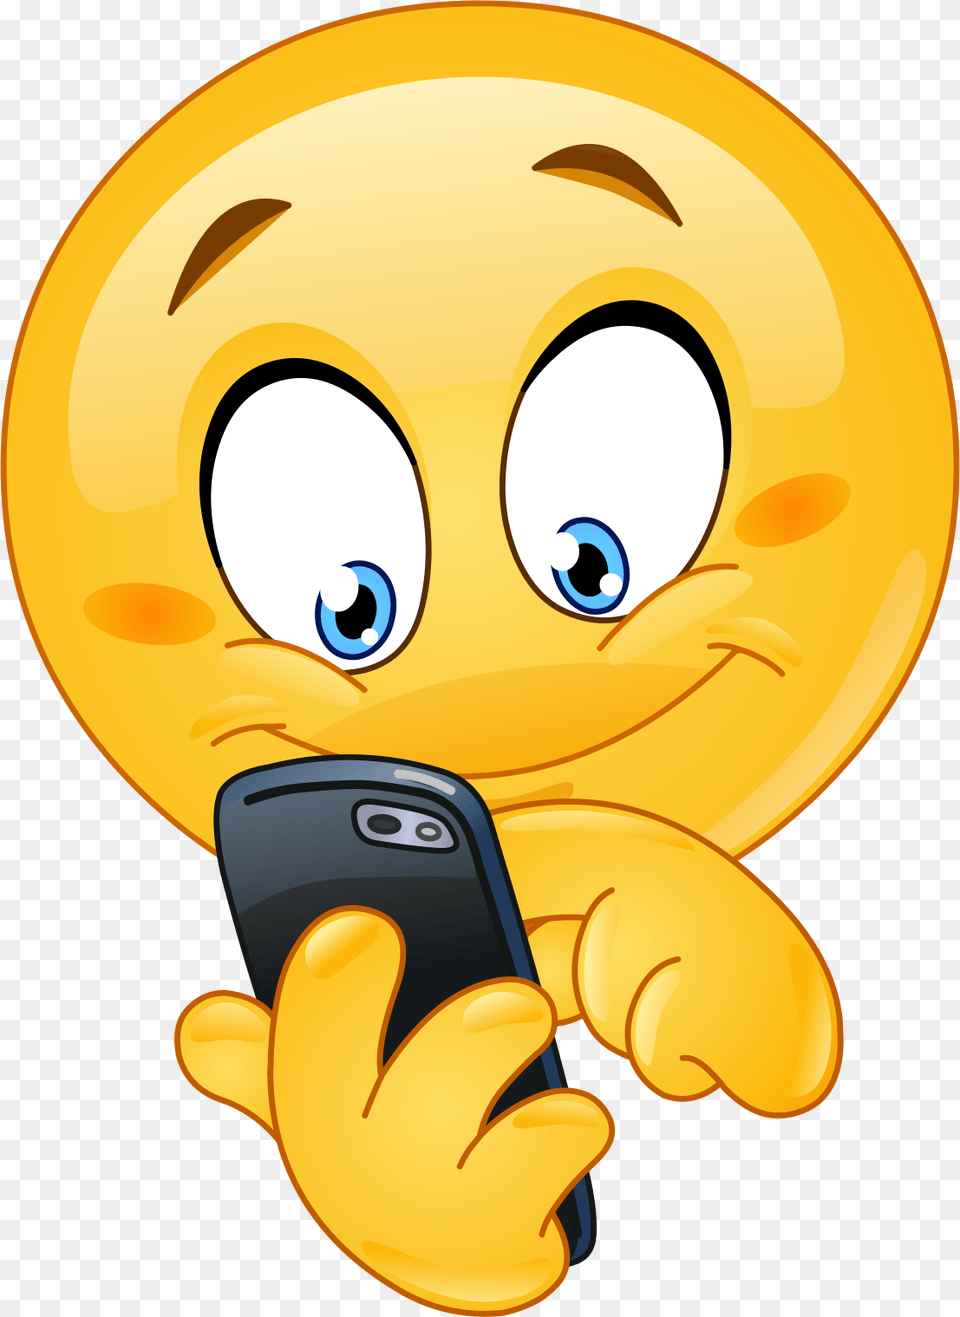 Cell Phone Emoji Decal, Electronics, Mobile Phone Png